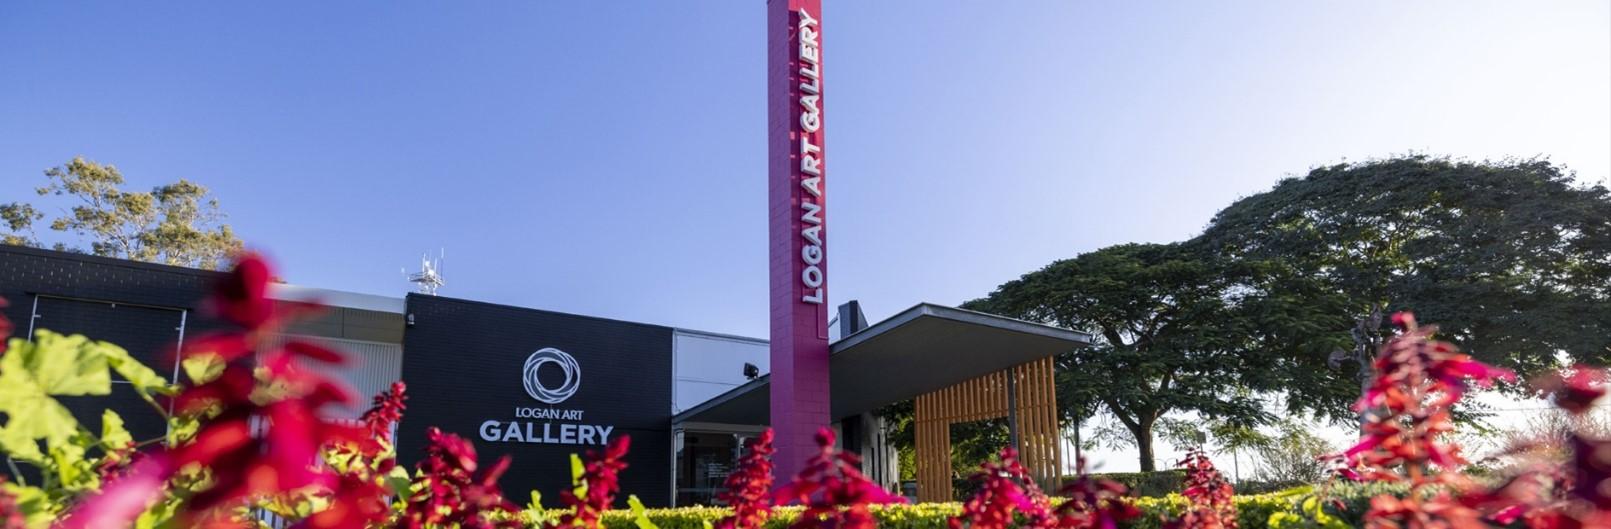 The Logan Art Gallery frontage with pink flowers in the foreground.